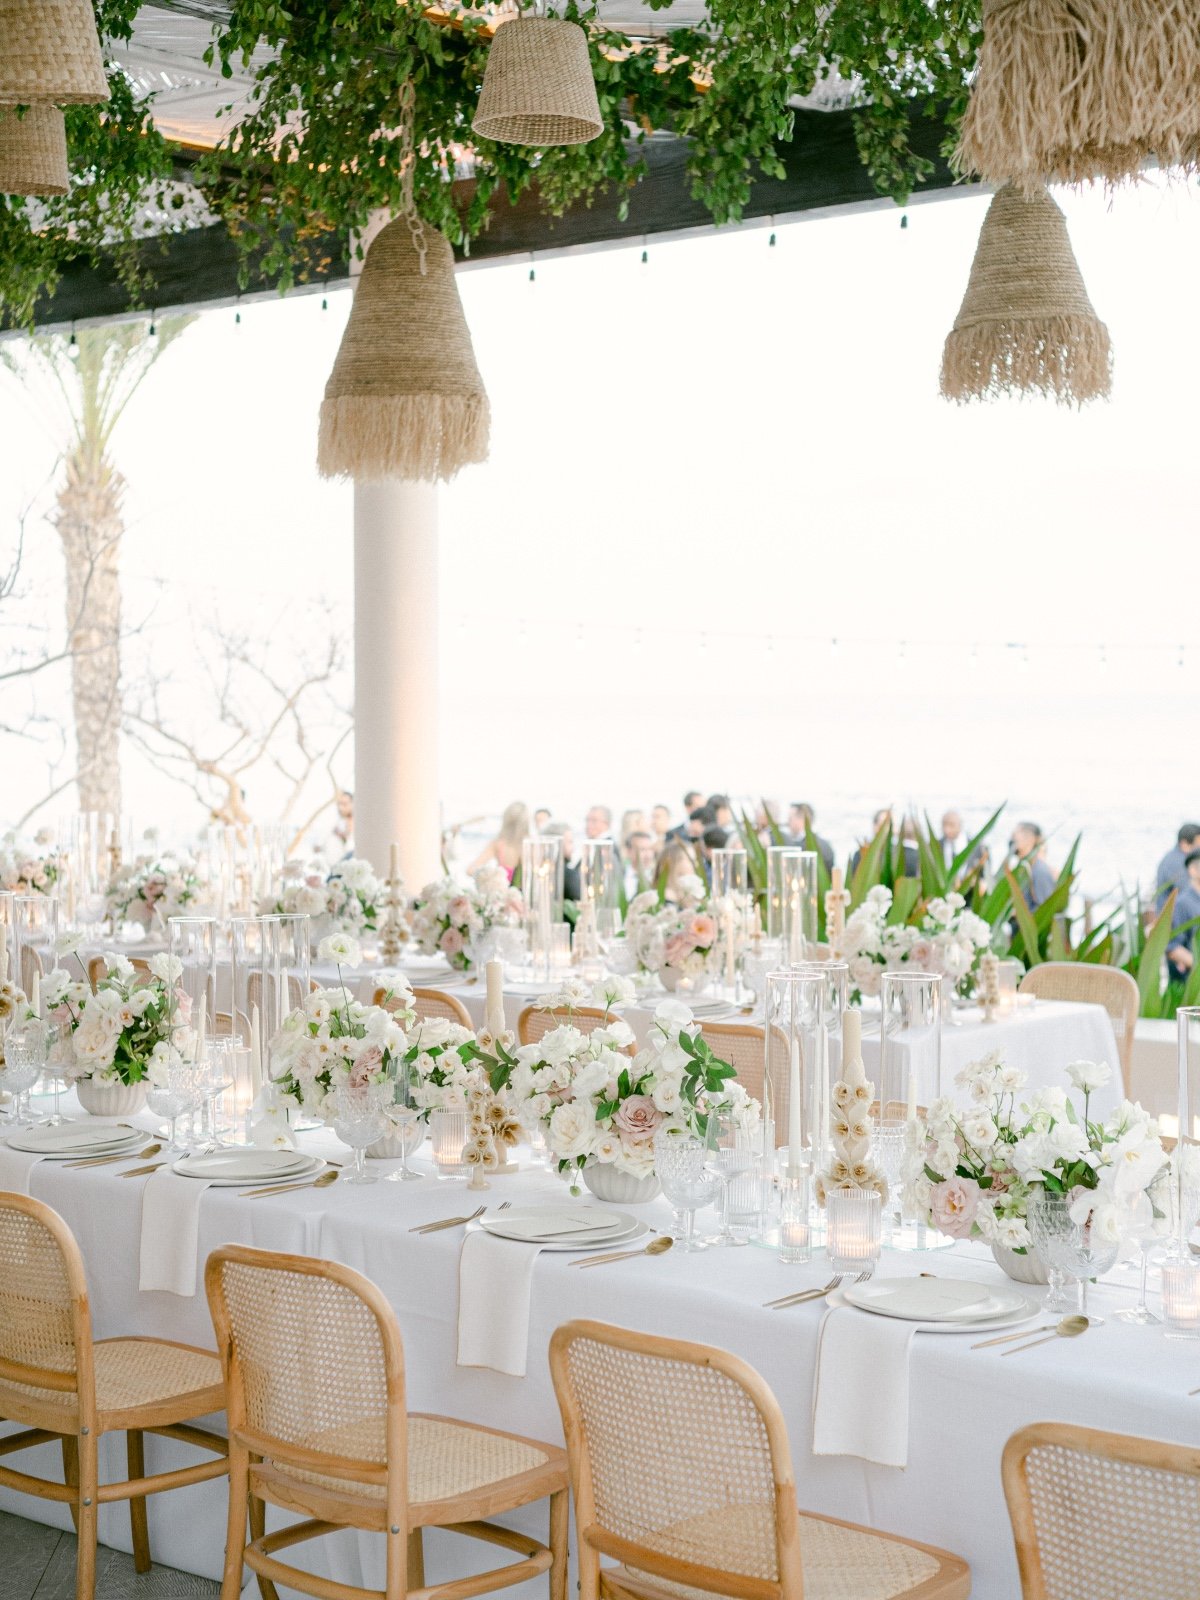 Reception table with white and pink floral arrangements, rattan chairs, and candles under glass